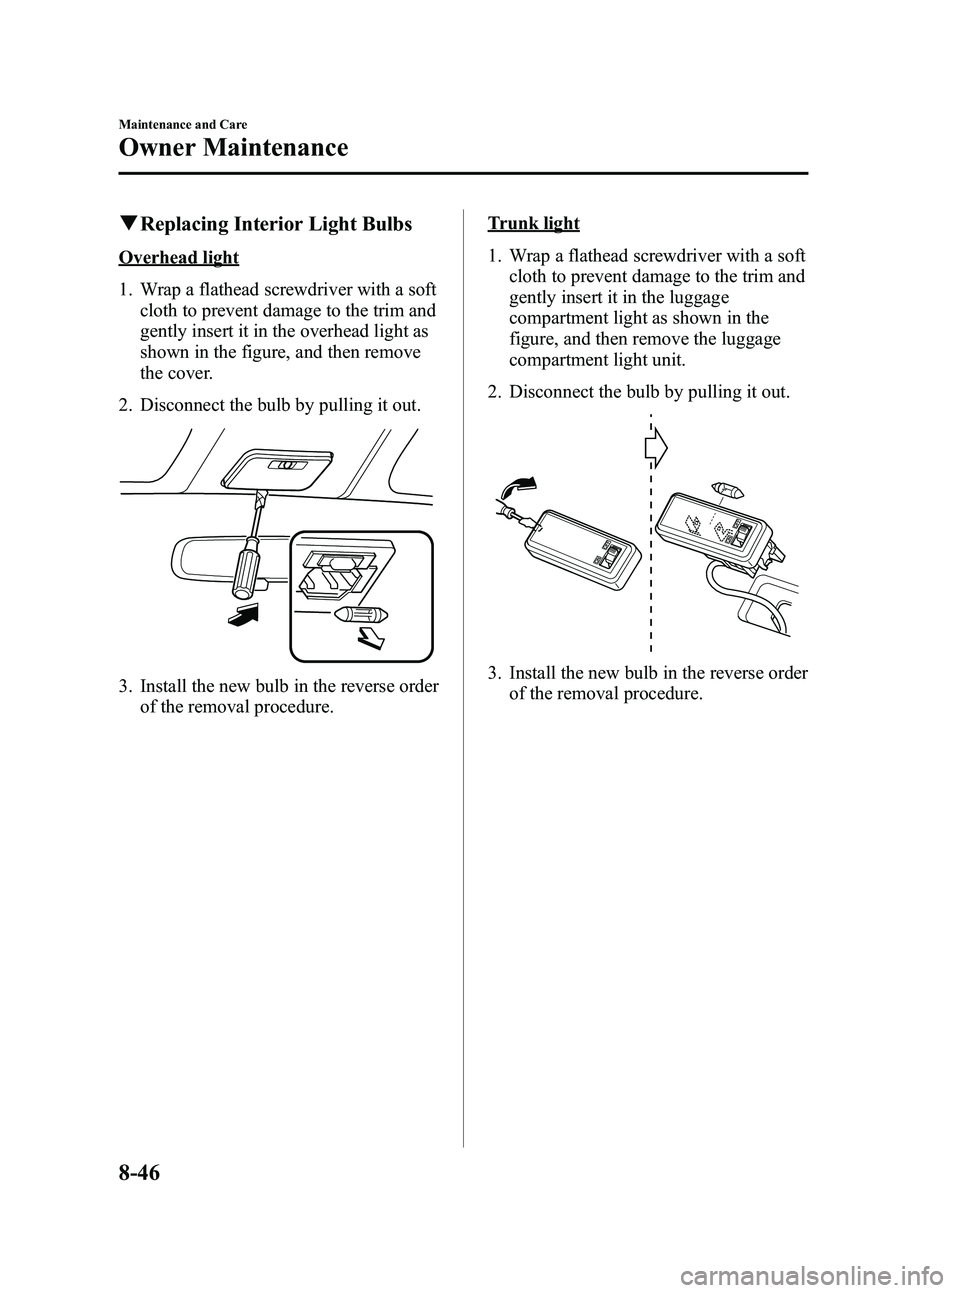 MAZDA MODEL MX-5 MIATA PRHT 2013  Owners Manual Black plate (374,1)
qReplacing Interior Light Bulbs
Overhead light
1. Wrap a flathead screwdriver with a soft
cloth to prevent damage to the trim and
gently insert it in the overhead light as
shown in